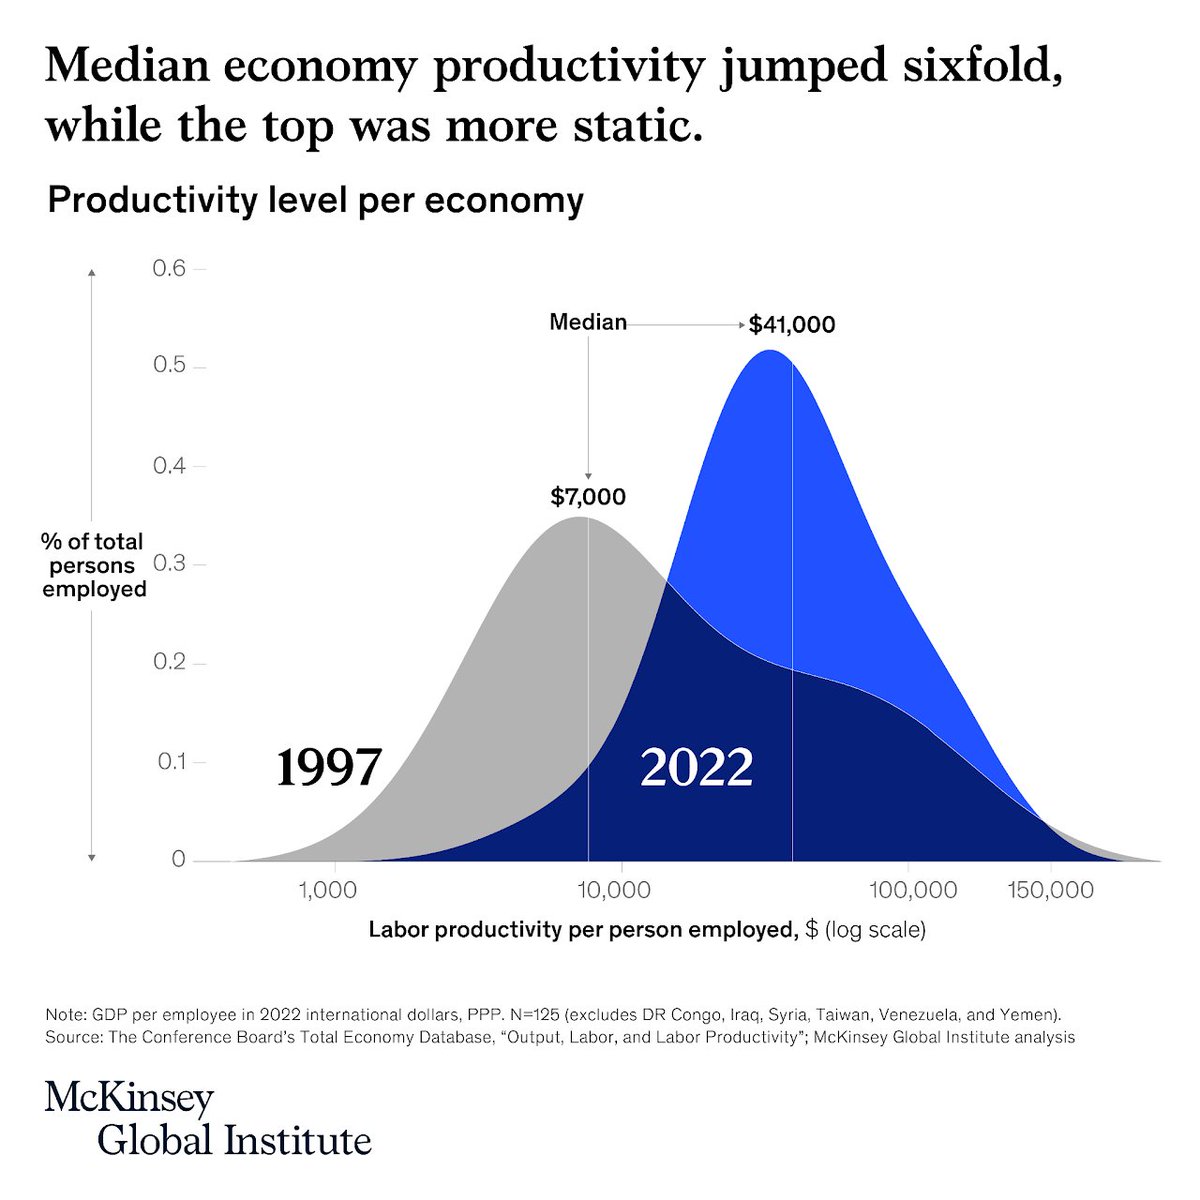 The world’s living standards have climbed sharply over the past 25 years, driven by strong productivity growth. But productivity growth has stalled. What would it take to accelerate? mck.co/productivity20…